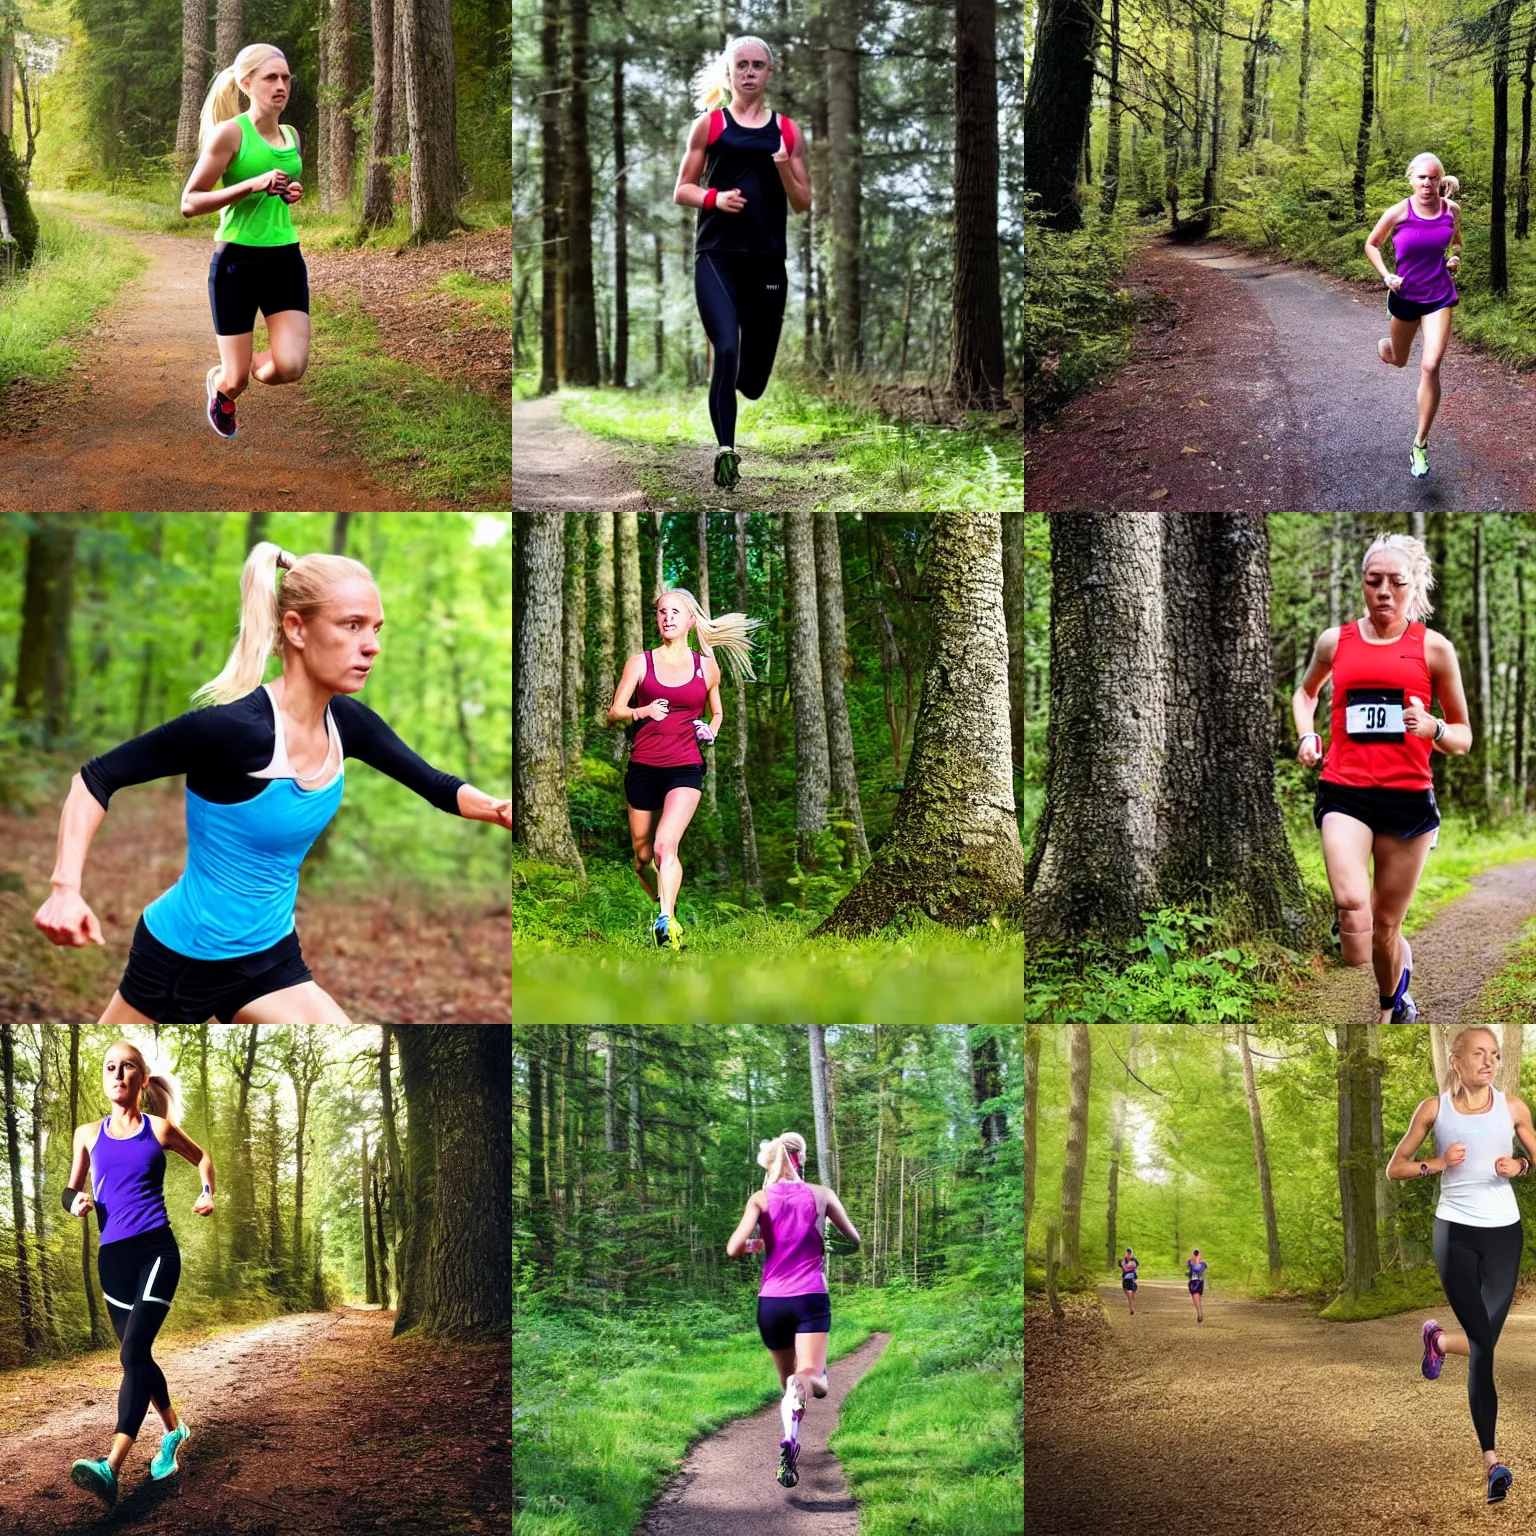 Prompt: a female runner with blonde hair in a ponytail running a race through the woods, photorealistic